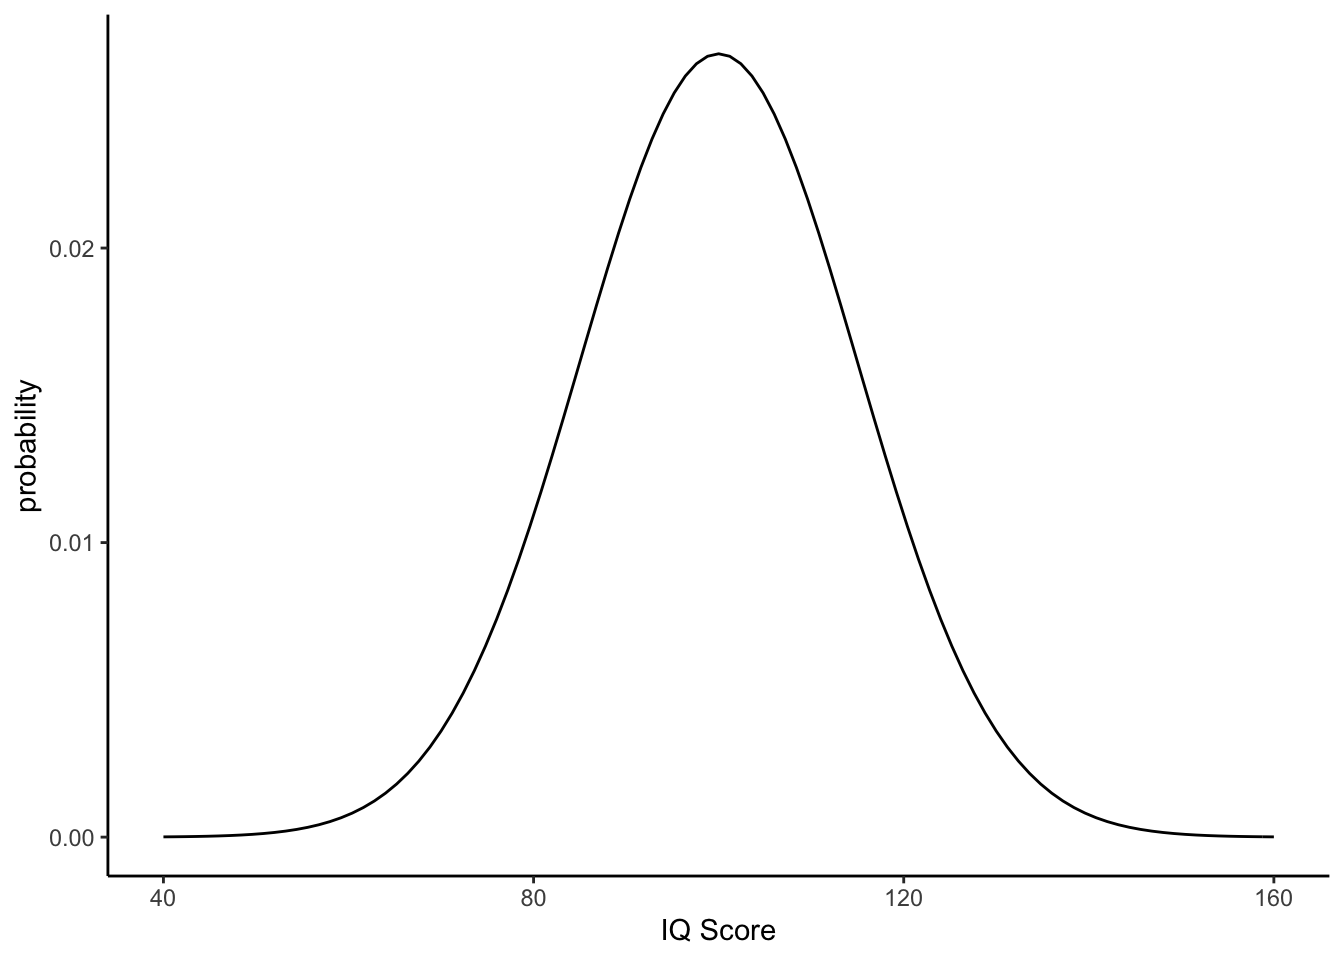 Distribution of IQ scores with mean = 100, sd = 10